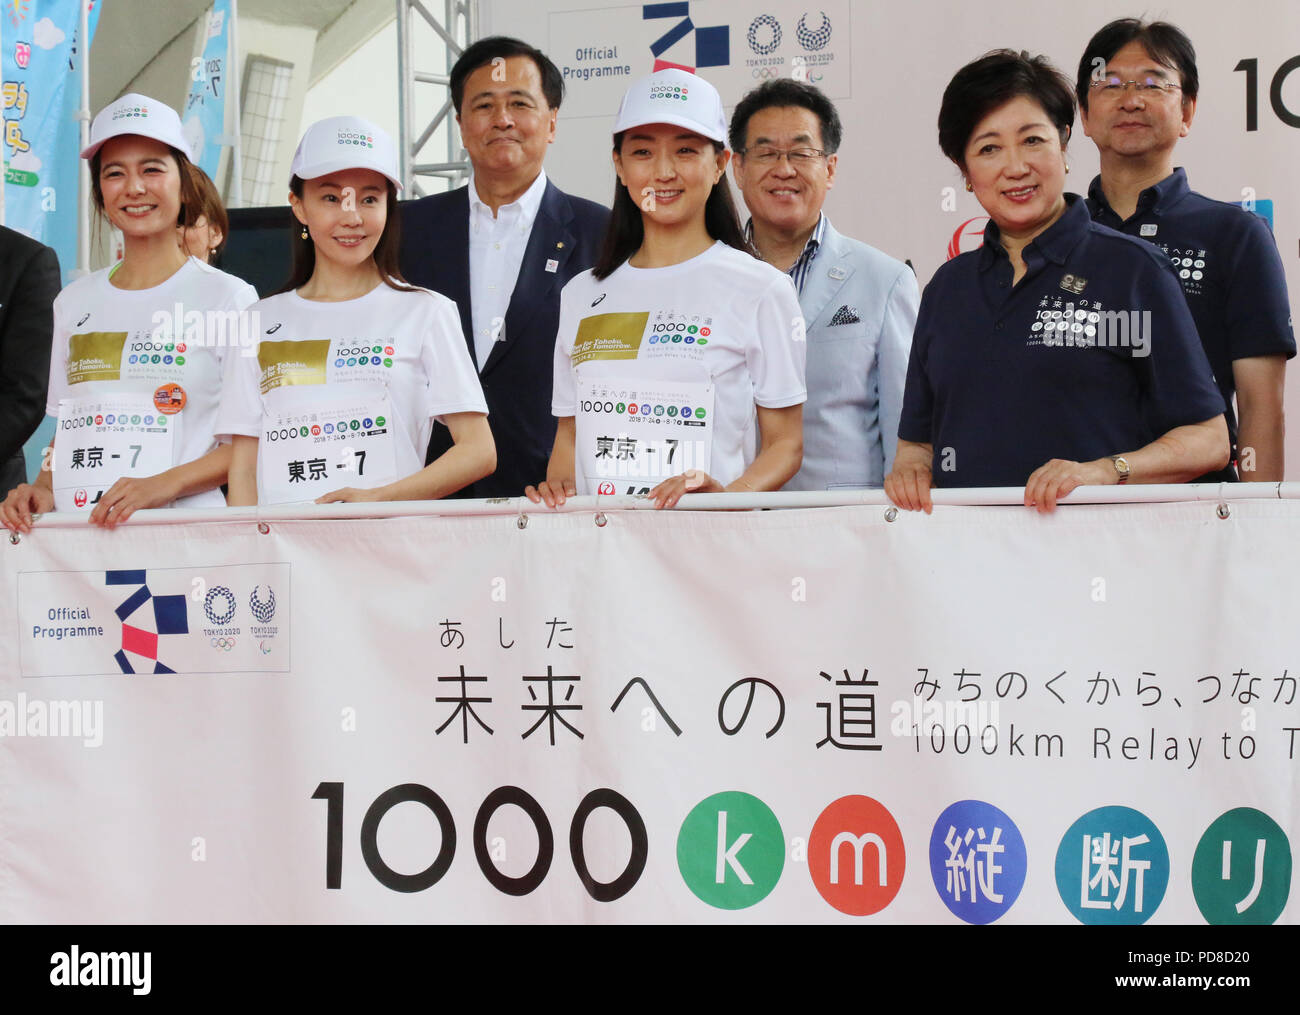 Tokyo, Japan. 7th Aug, 2018. (R-L) Tokyo Governor Yuriko Koike, Barcelona Olympics swimming gold medalist Kyoko Iwasaki, marathon runner Masako Chiba and TV personality Suzanne pose for photo after they finished the '1,000km relay to Tokyo' at the Komazawa stadium in Tokyo on Tuesday, August 7, 2018. Some 1,600 runners participated the marathon relay from Aomori to Tokyo for the commemoration of the 3.11 East Japan Great Earthquake. Credit: Yoshio Tsunoda/AFLO/Alamy Live News Stock Photo